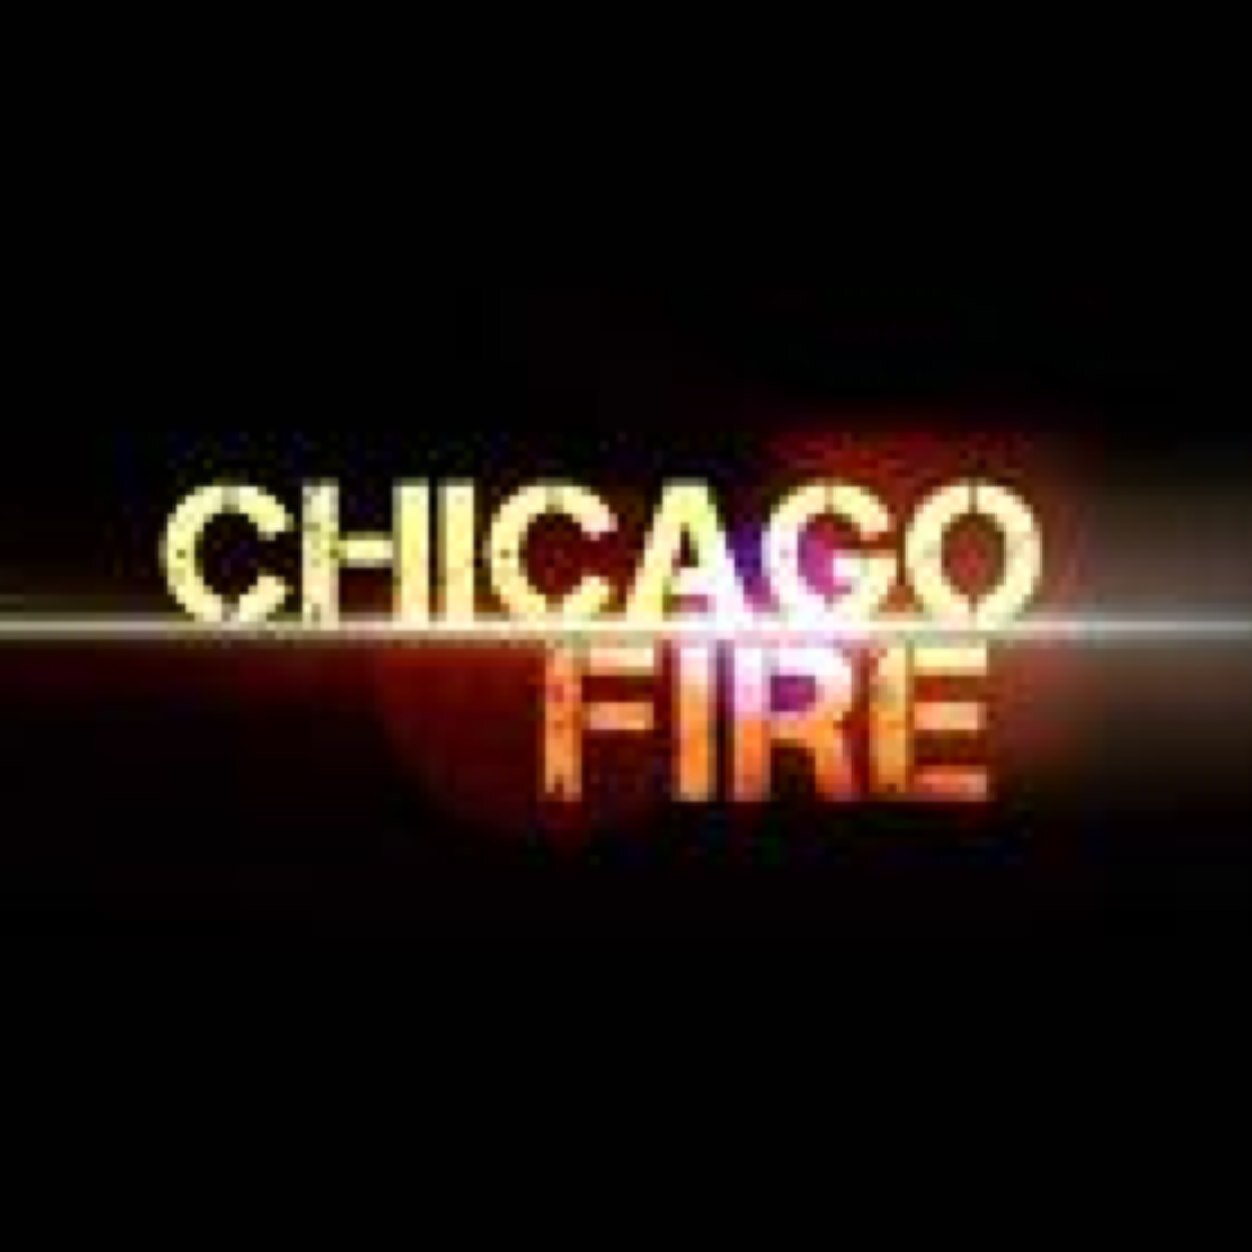 Fan of Chicago Fire & Chicago PD